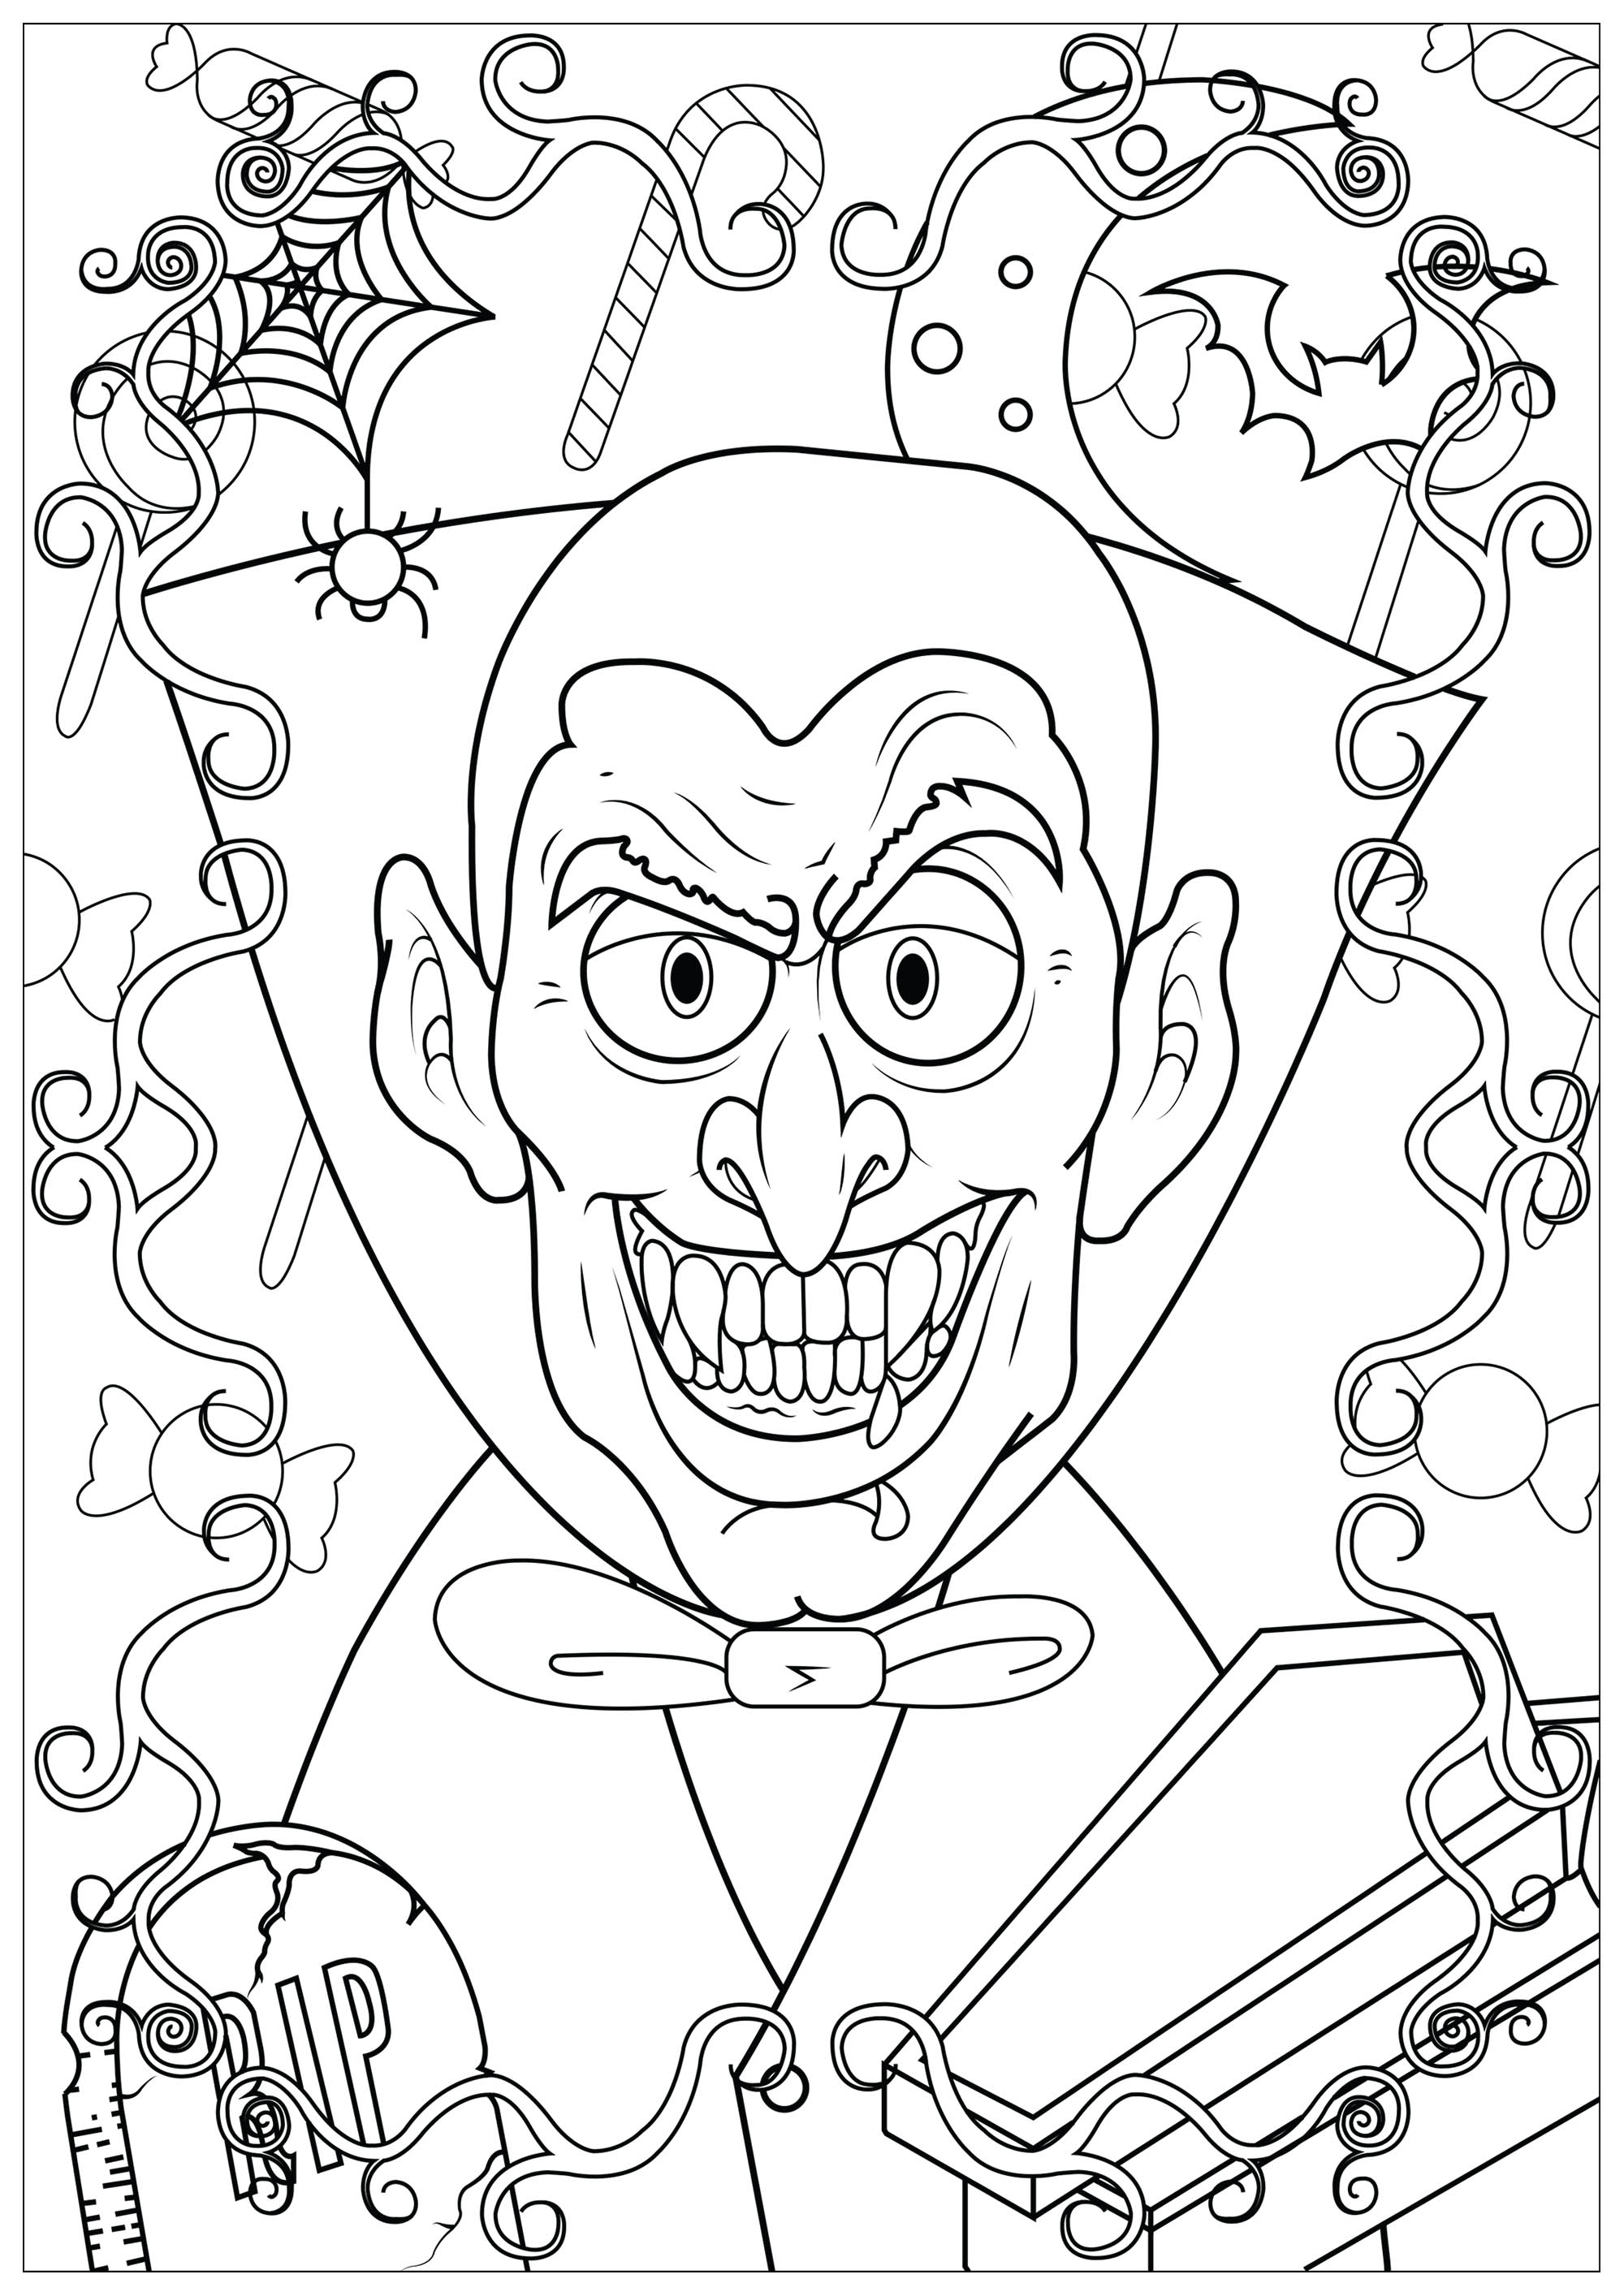 Vampire d'Halloween - Halloween Adult Coloring Pages